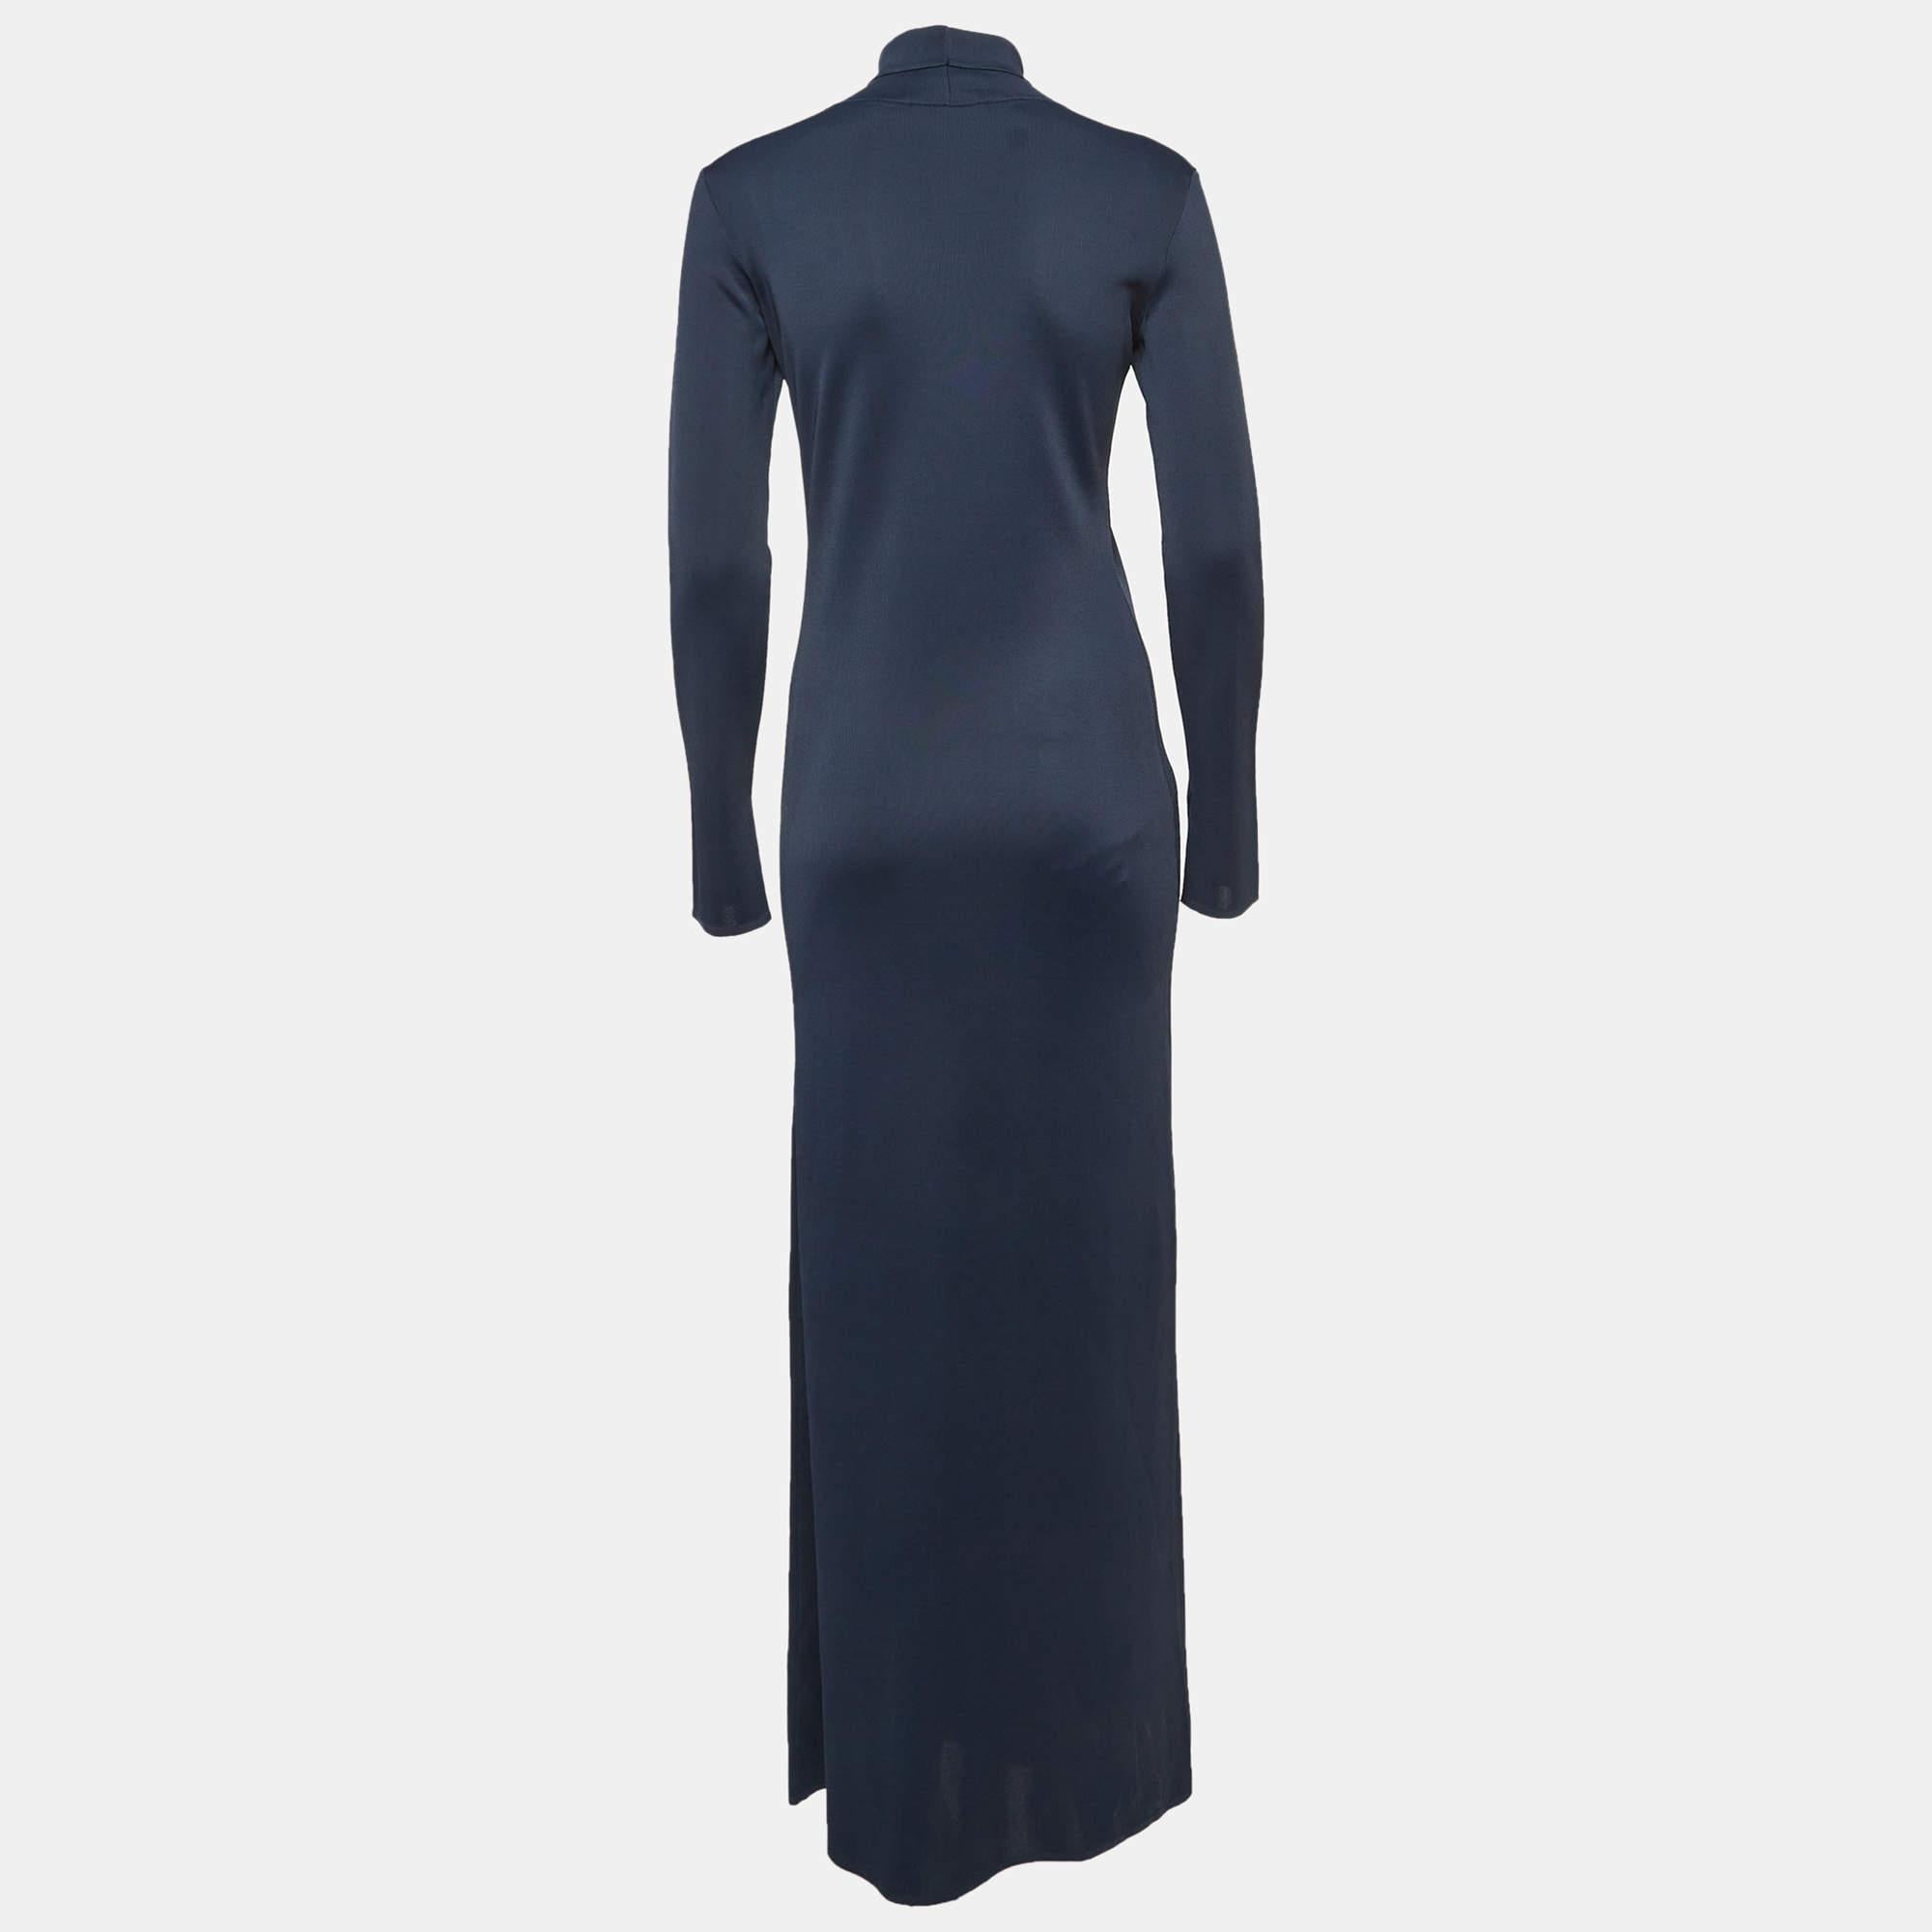 Experience the joy of expert tailoring with this designer dress for women. Meticulously made, it offers a flawless fit and luxe details, ensuring unmatched comfort. This beautiful creation will elevate your style effortlessly.

